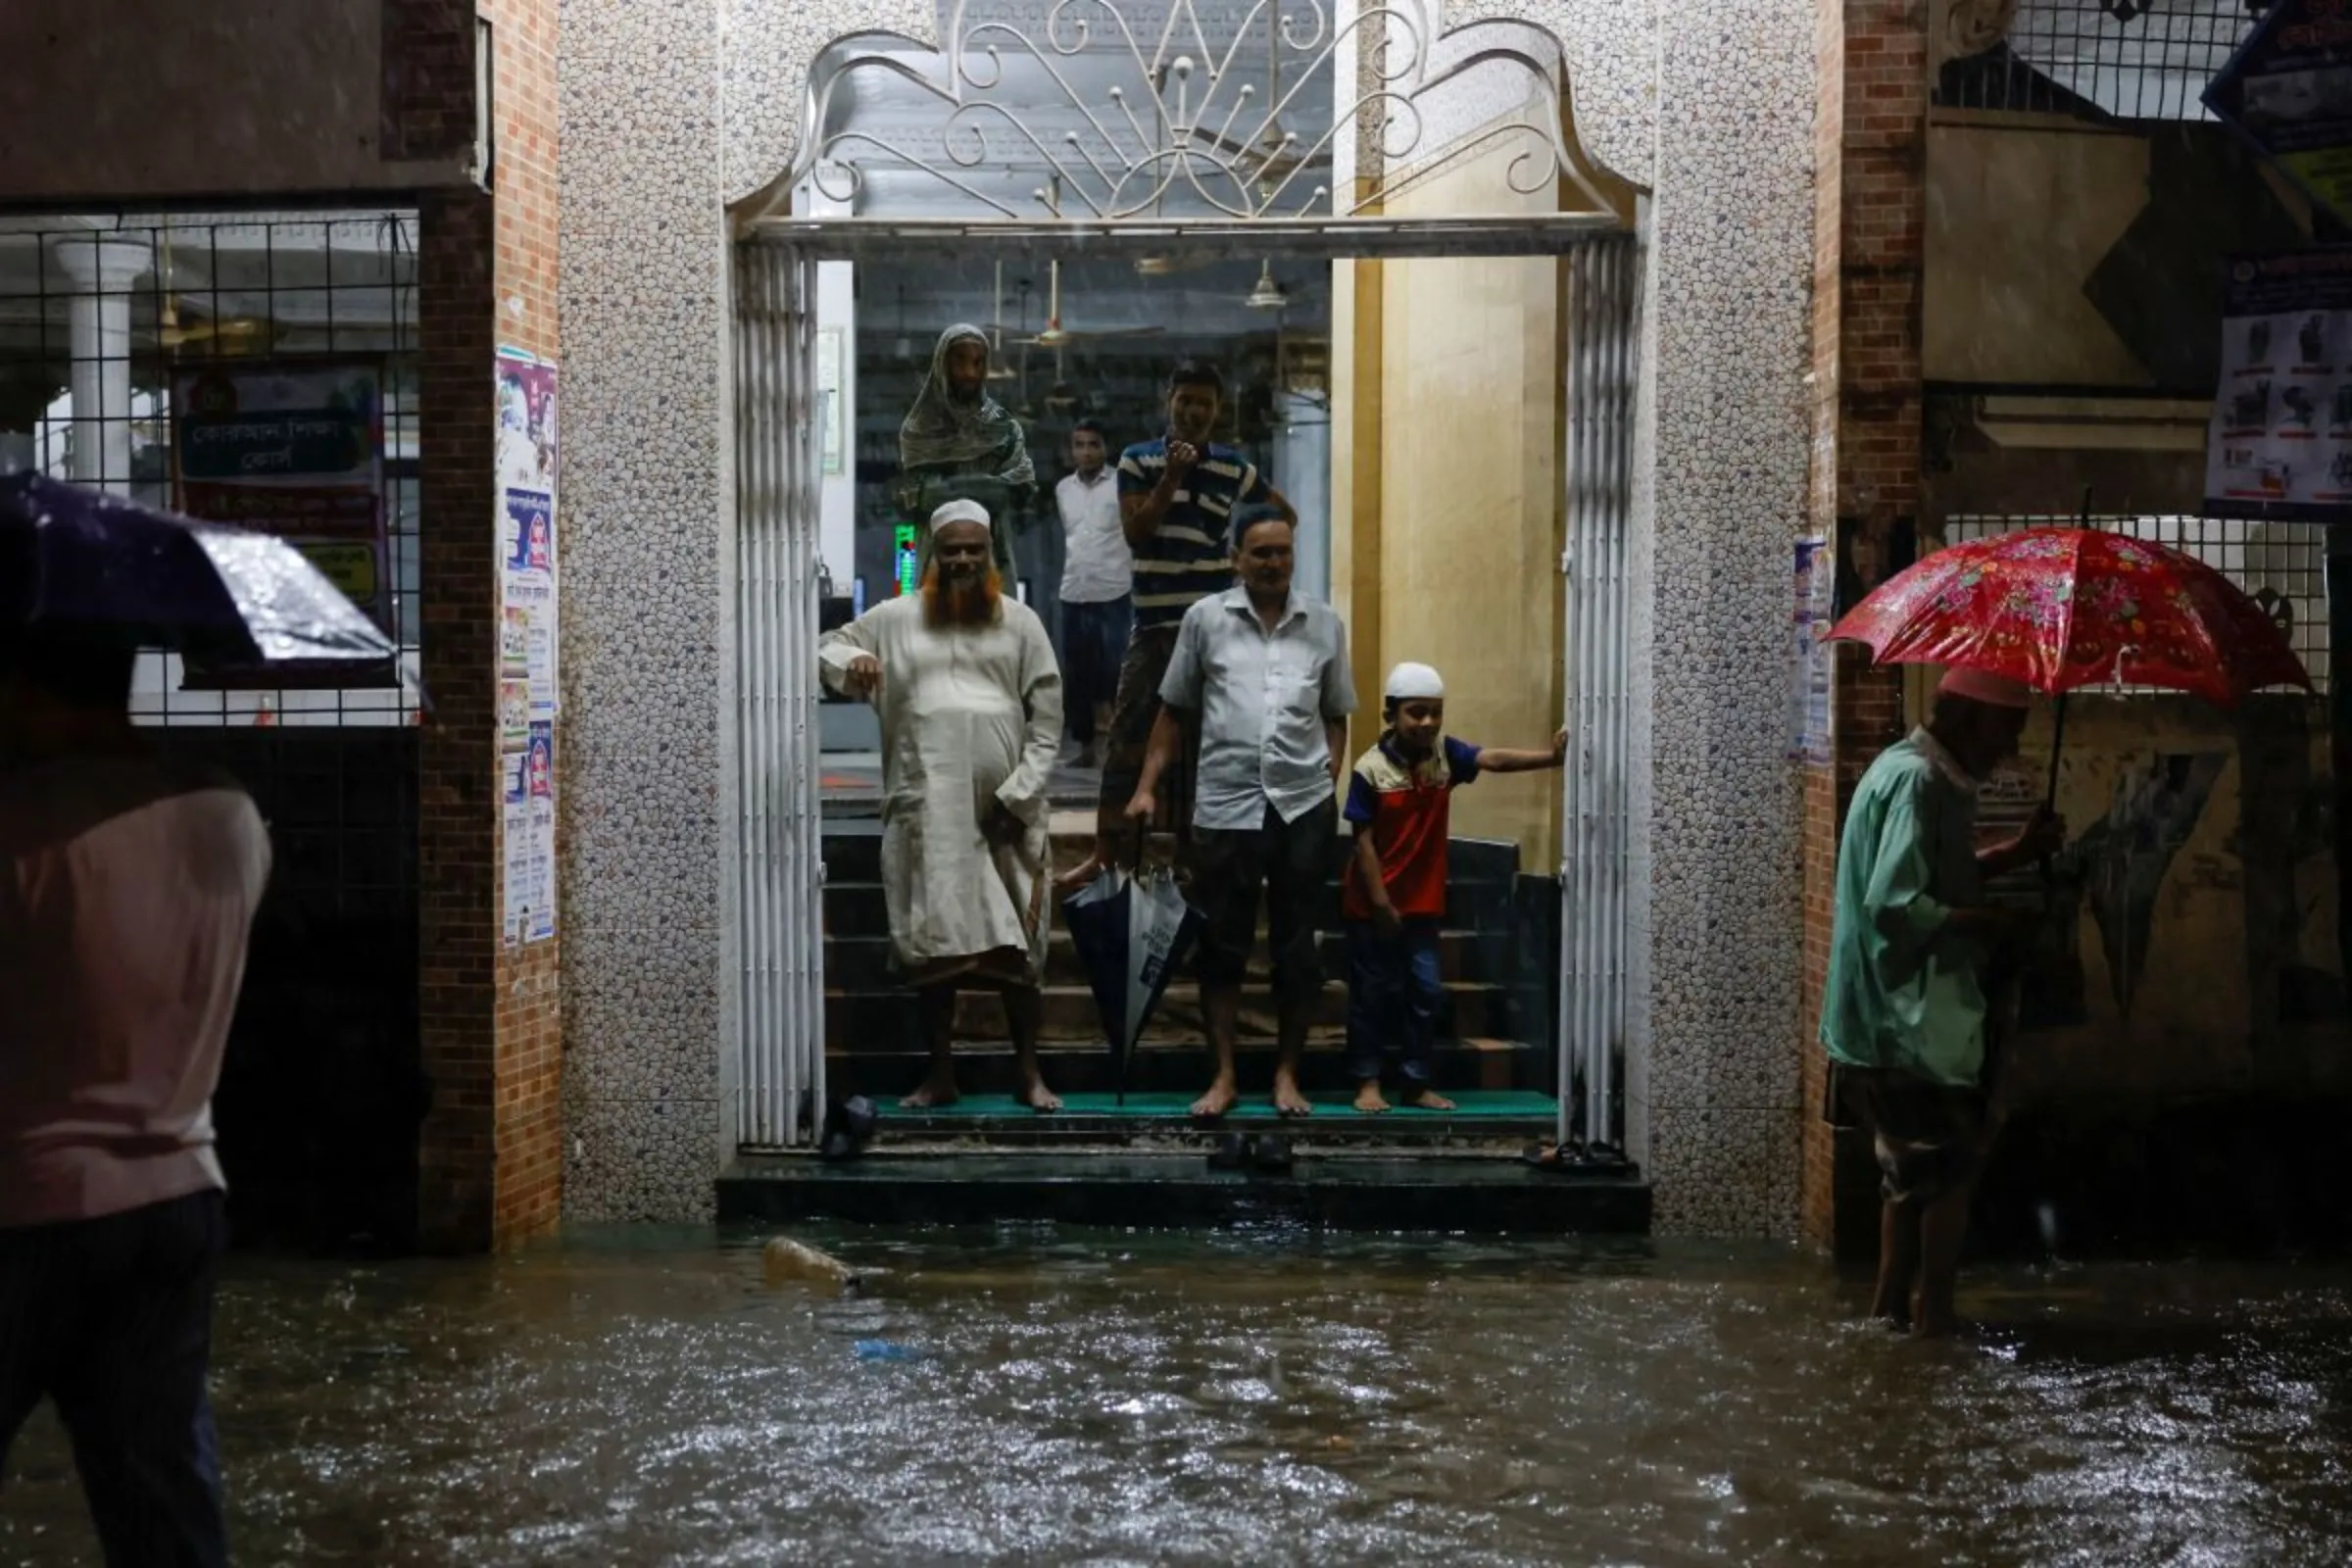 People wait by a mosque as streets are flooded before the Cyclone Sitrang hits, Dhaka, Bangladesh, October 24, 2022. REUTERS/Mohammad Ponir Hossain